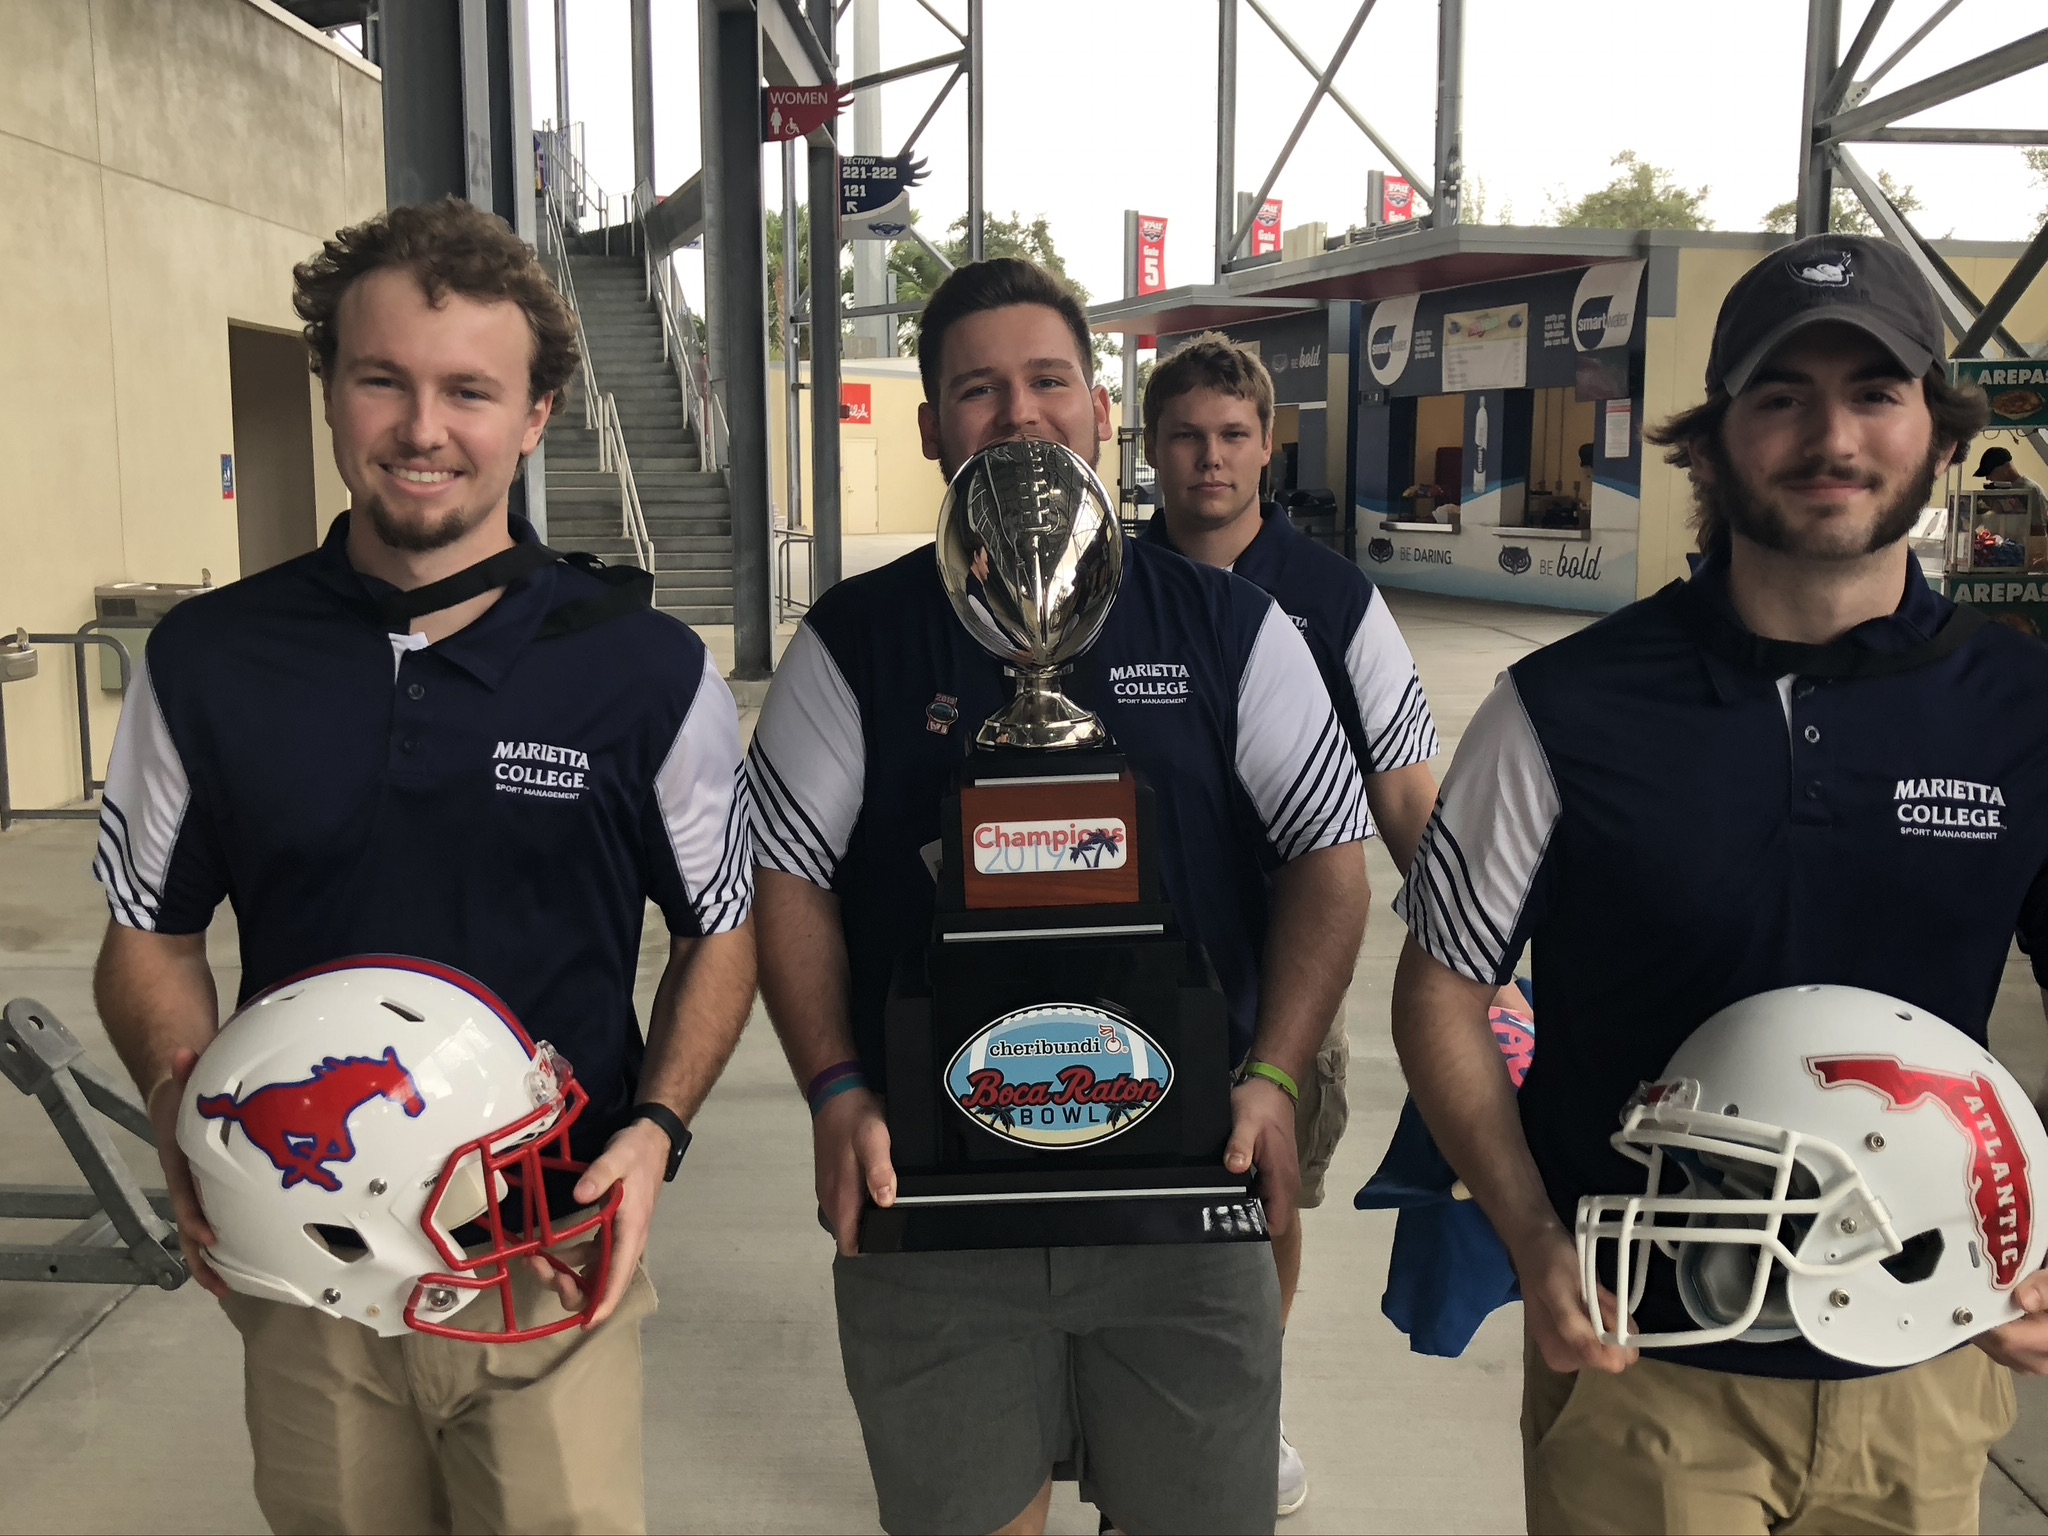 Marietta College Students job shadowing at the Boca Bowl pose with the game's trophy.